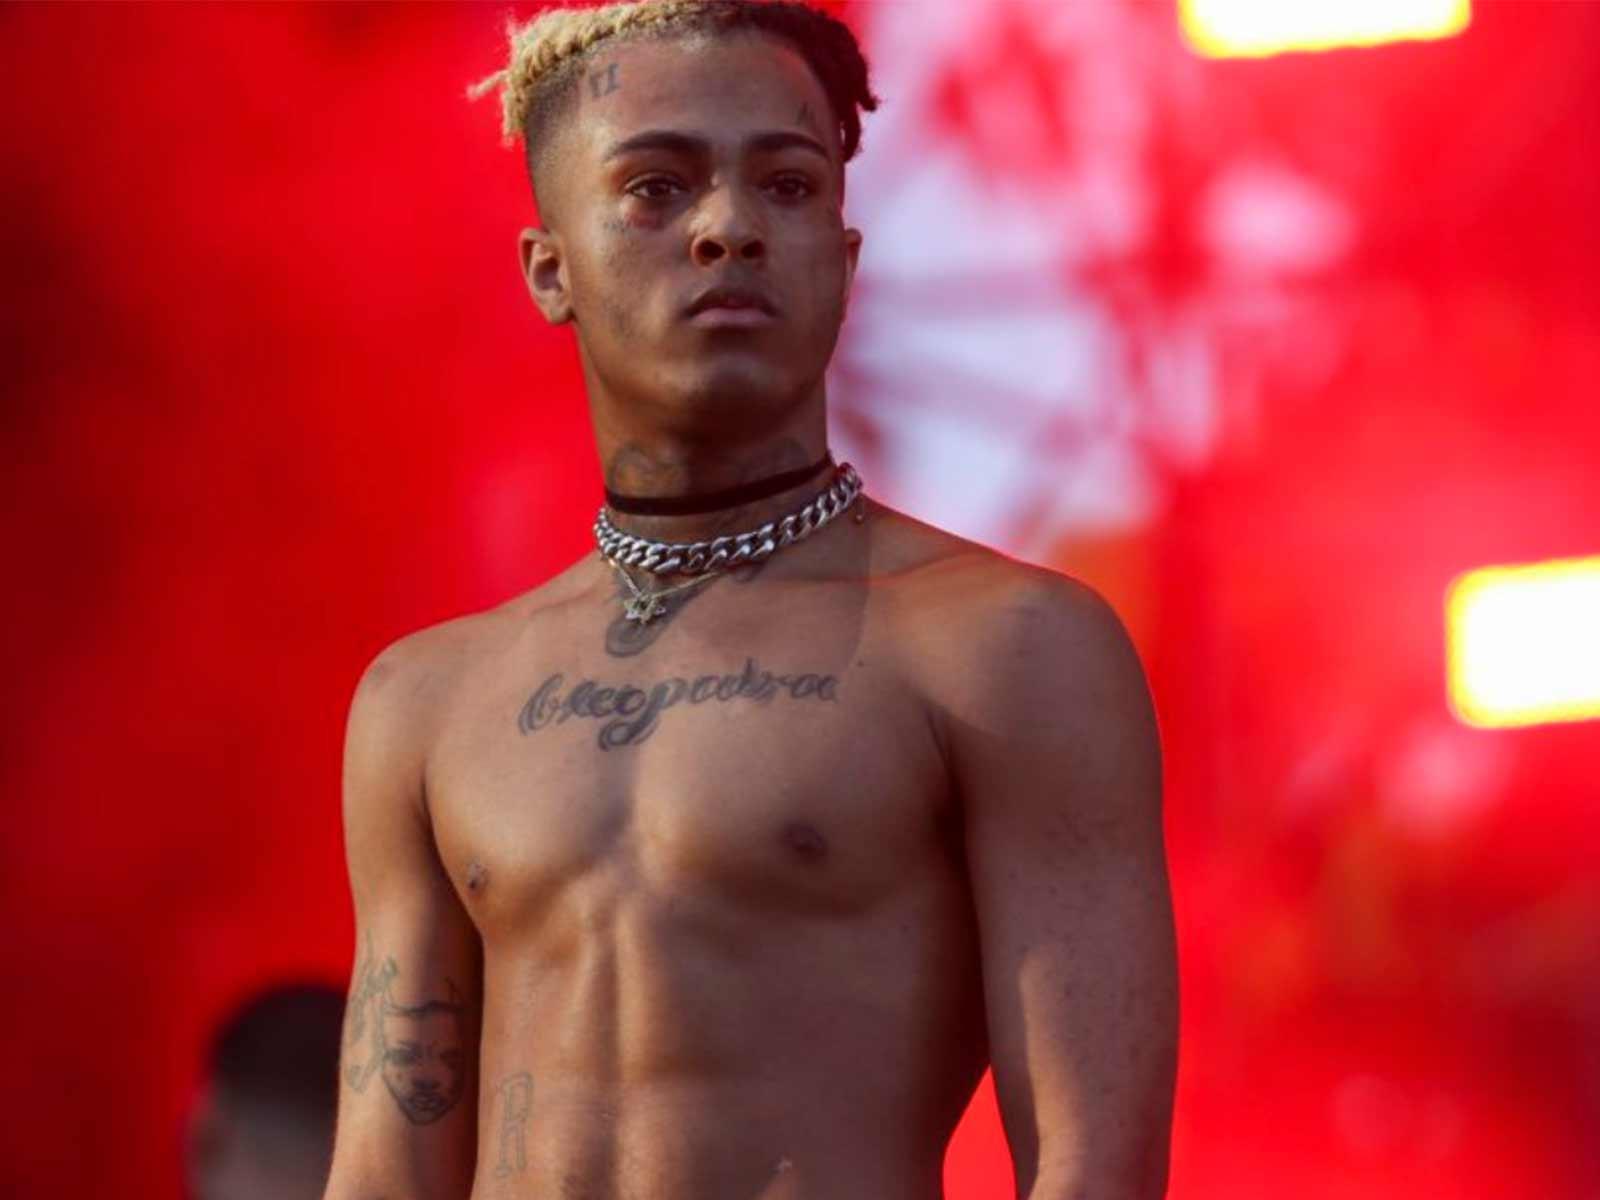 XXXTentacion Drafted a Will Months Before His Tragic Death